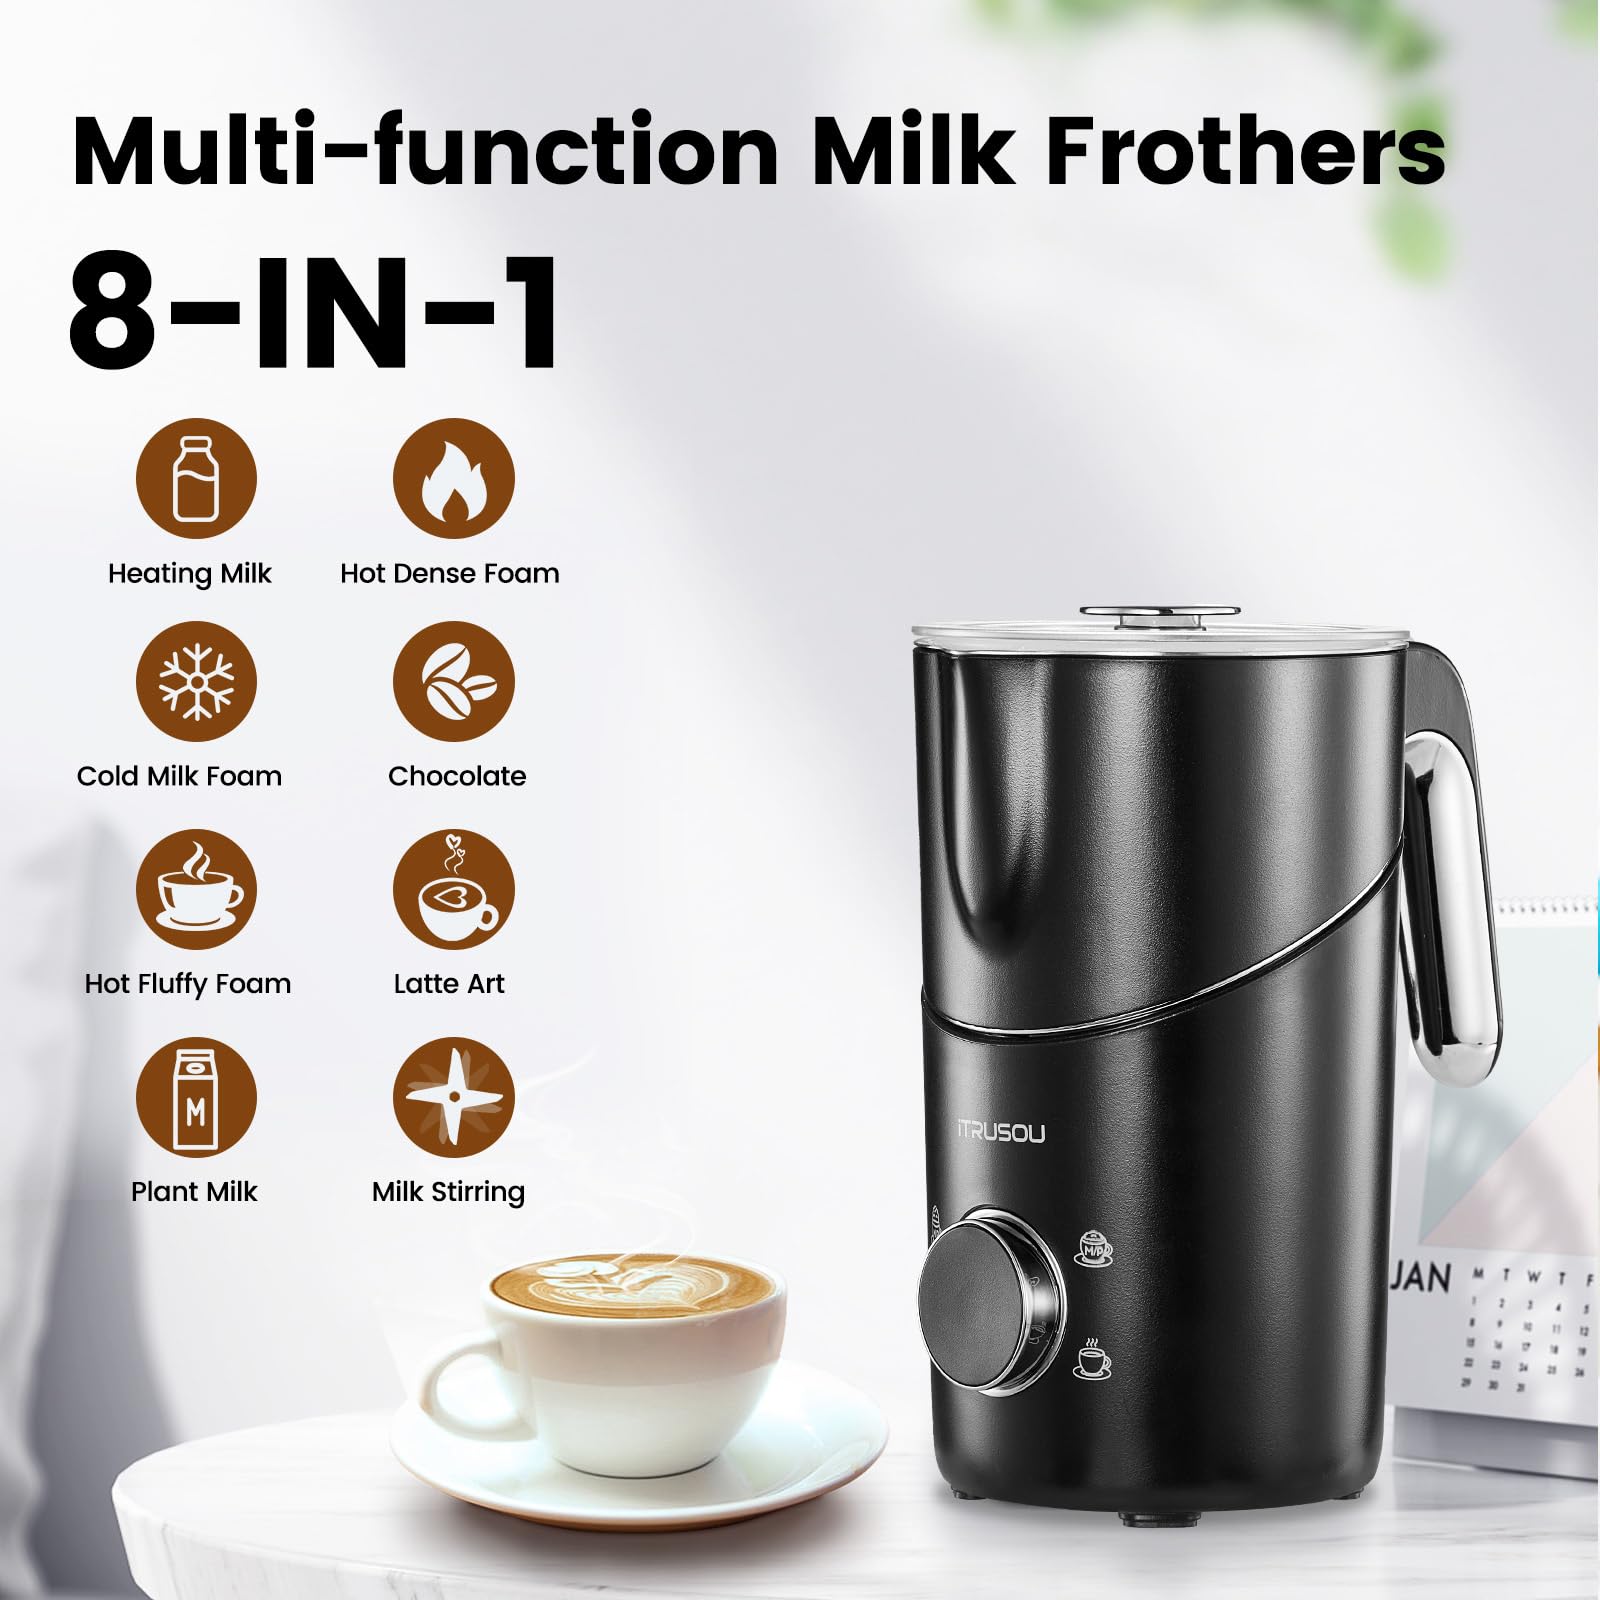 Milk Frother - iTRUSOU Milk Steamer Electric Frother, Hot Cold Milk Steamer Frothers Foam Maker, Milk Warmer Frother for Latte, Cappuccinos, Macchiato, Auto Shut-Off & Quiet Working Black